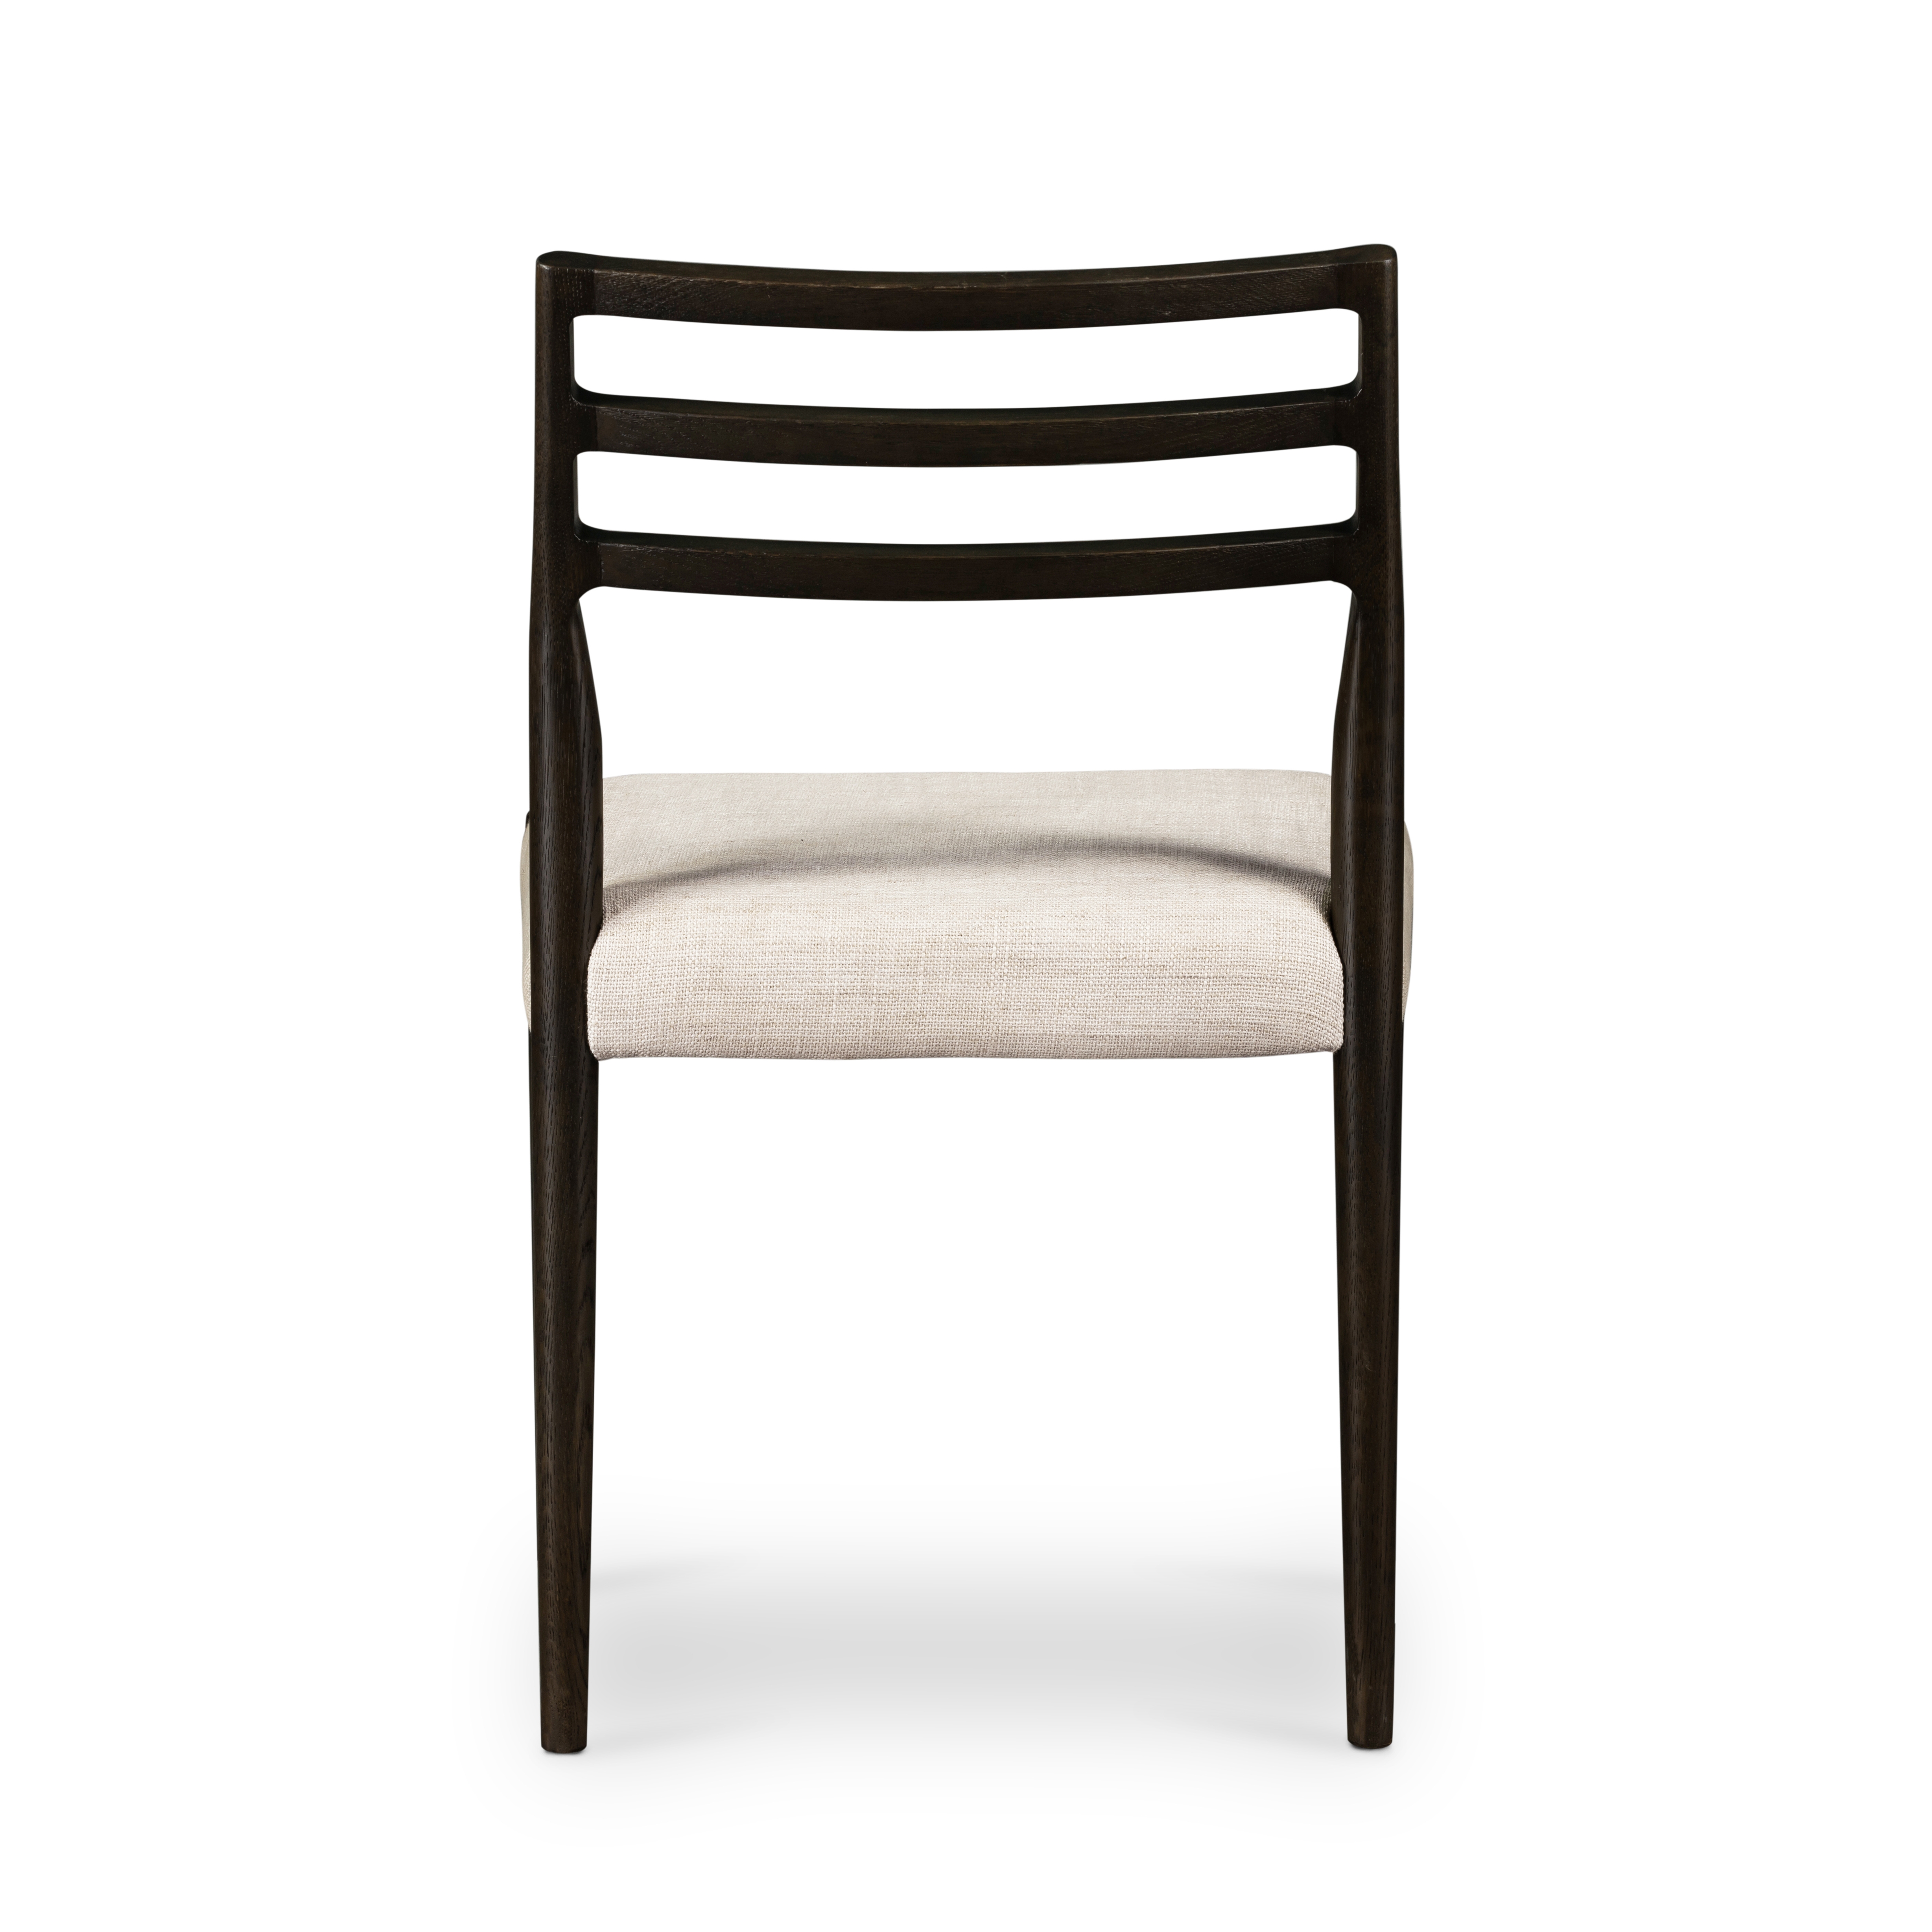 Glenmore Dining Chair-Essence Natural - Image 5